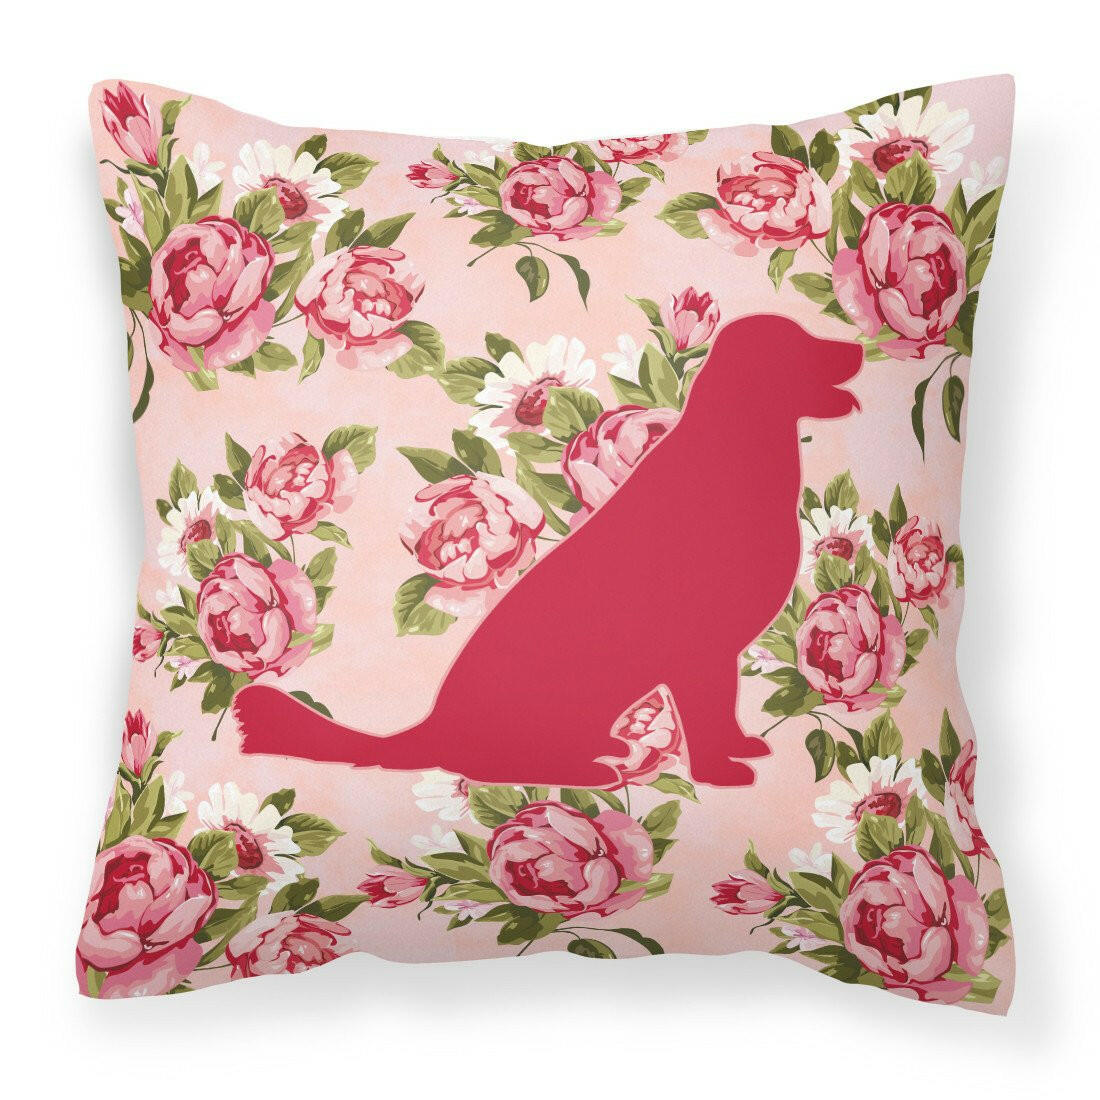 Labrador Shabby Chic Pink Roses  Fabric Decorative Pillow BB1076-RS-PK-PW1414 - the-store.com